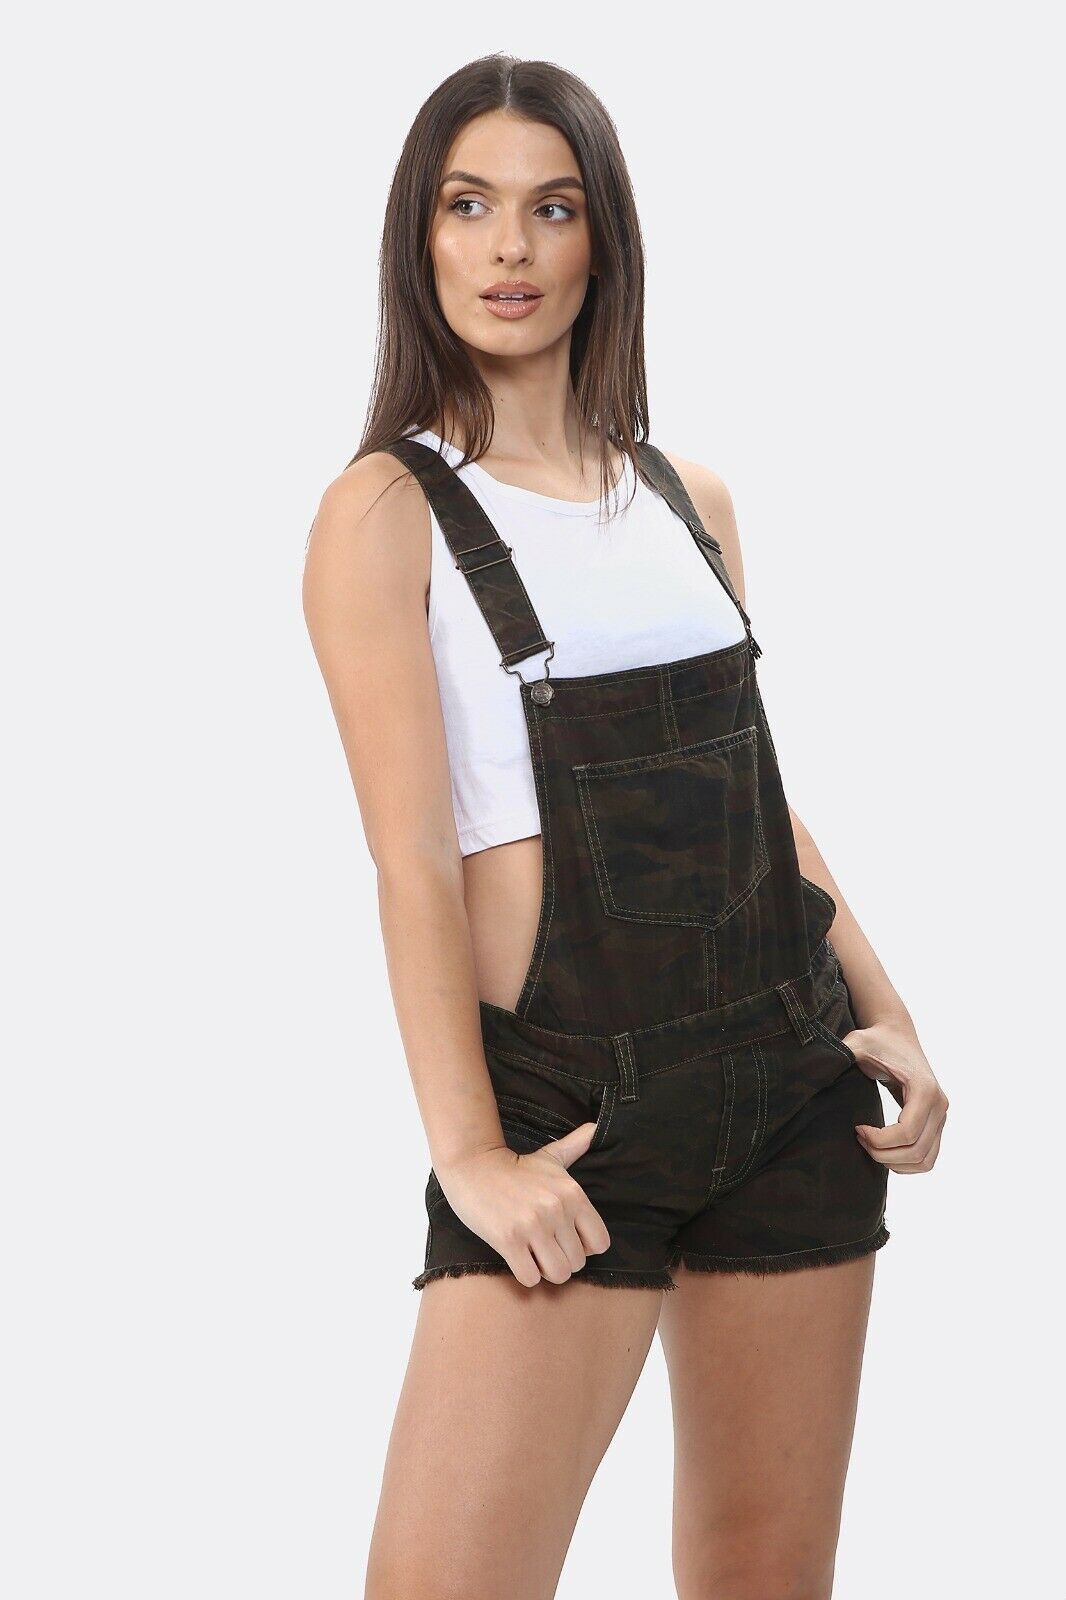 Ladies Camo Print Short Dungaree's. Pockets At The Front And Back. Sizes 8-20. The Straps Are Adjustable. Perfect For Summer Wear.